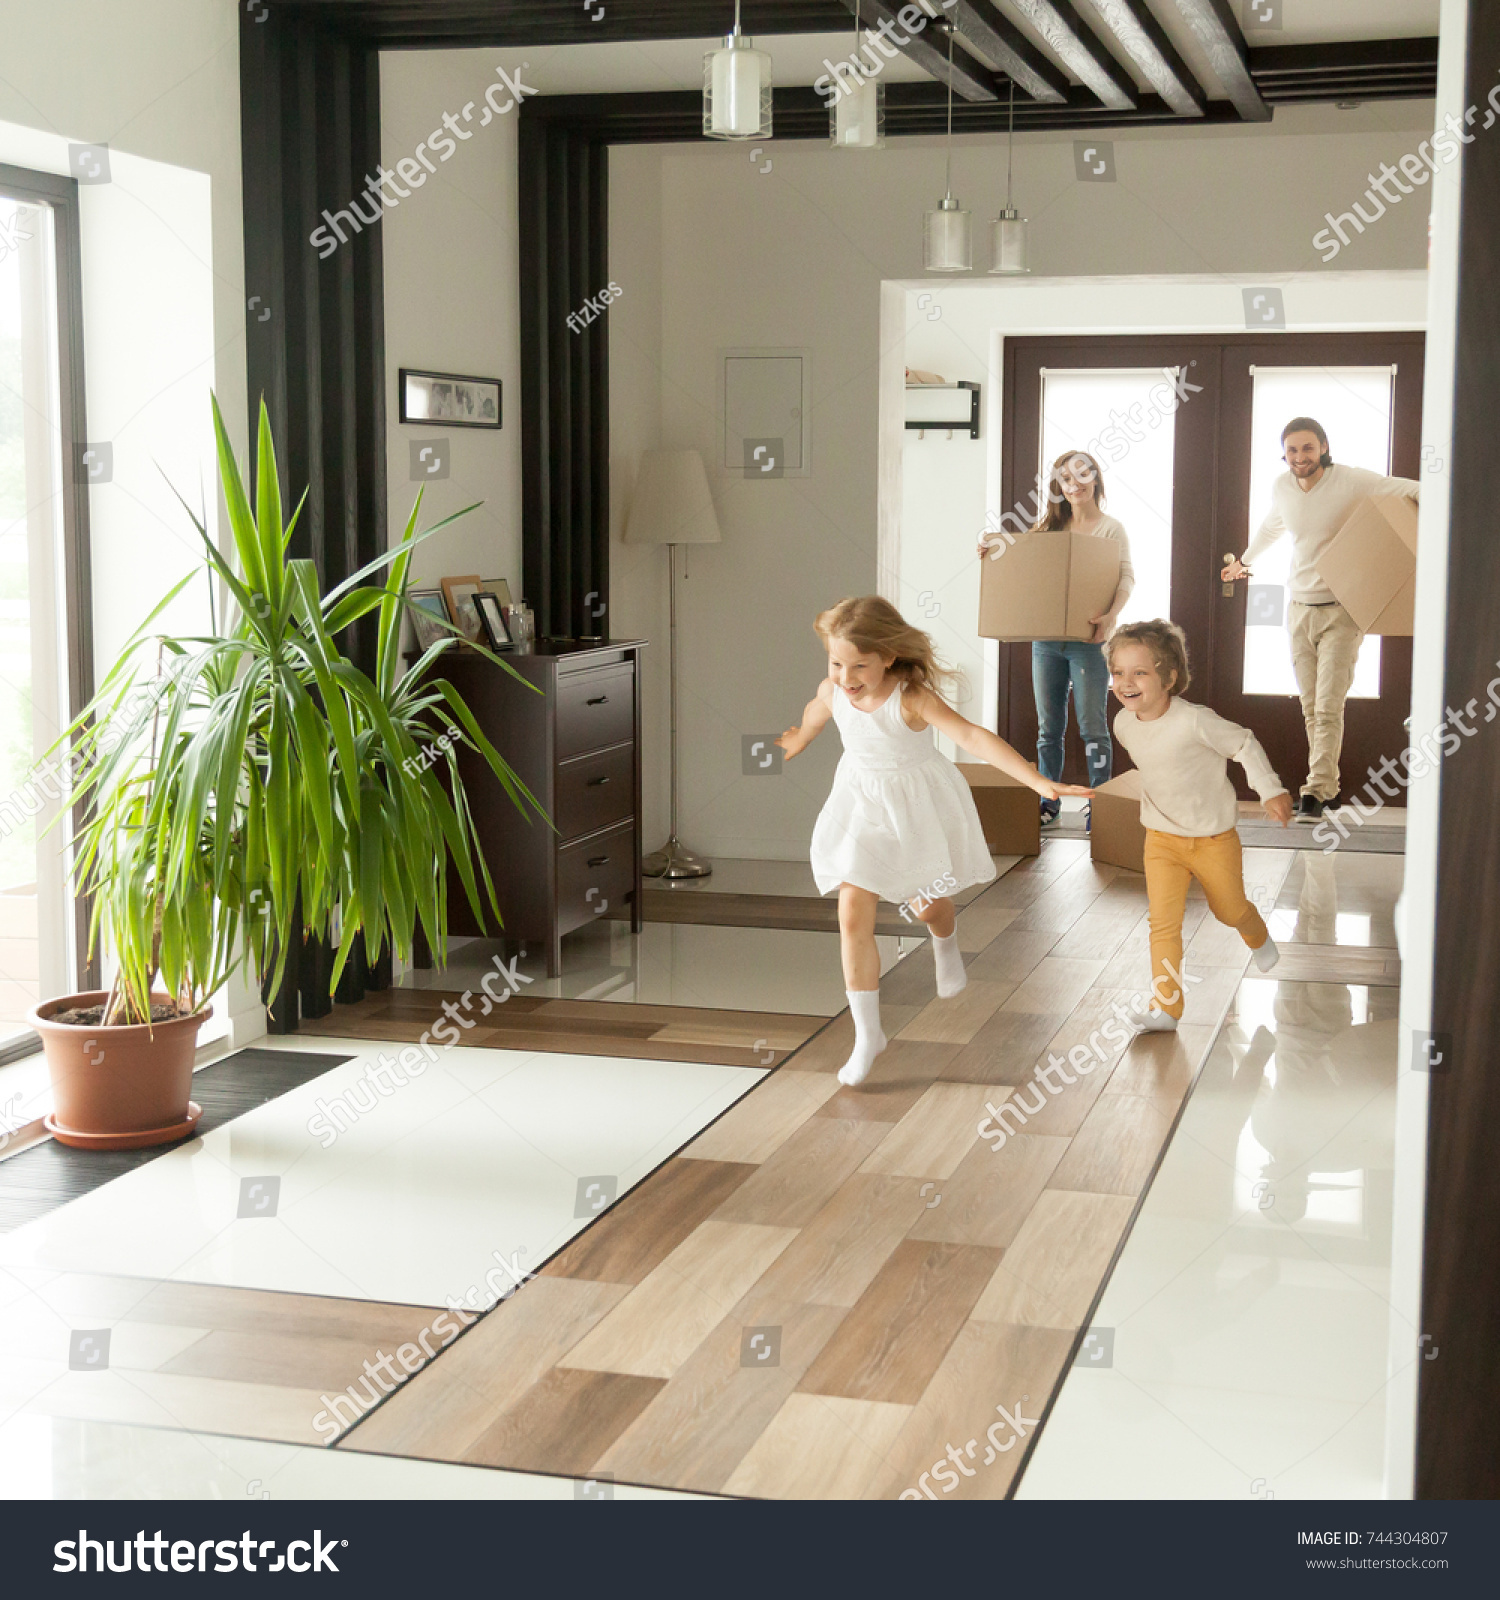 Playful happy kids running into new big own beautiful house, family moving in day concept, excited children exploring home interior having fun together, parents holding cardboard boxes at background  #744304807